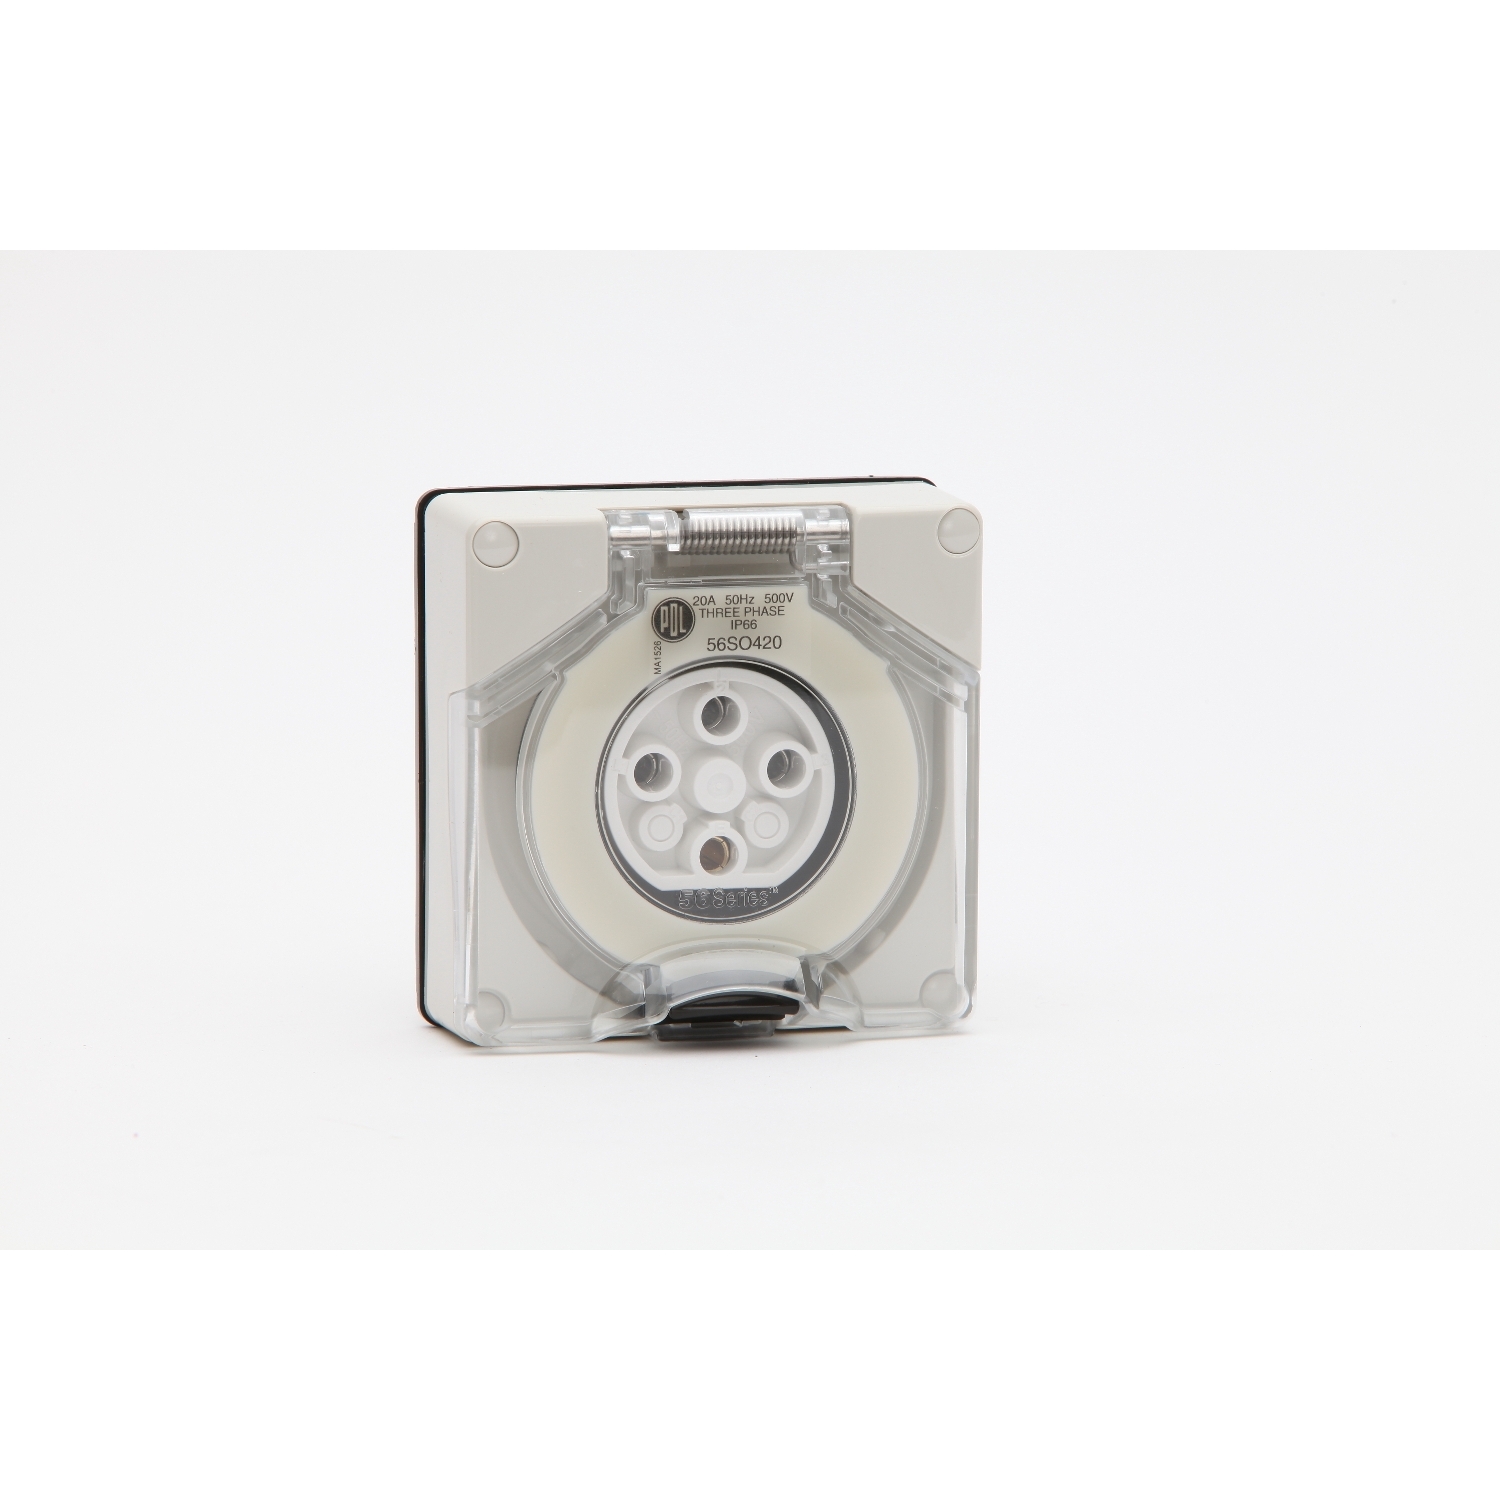 PDL 56 Series - Socket 20A 500V 3-Phase 4-Round Pin IP66 - Chemical-Resistant White